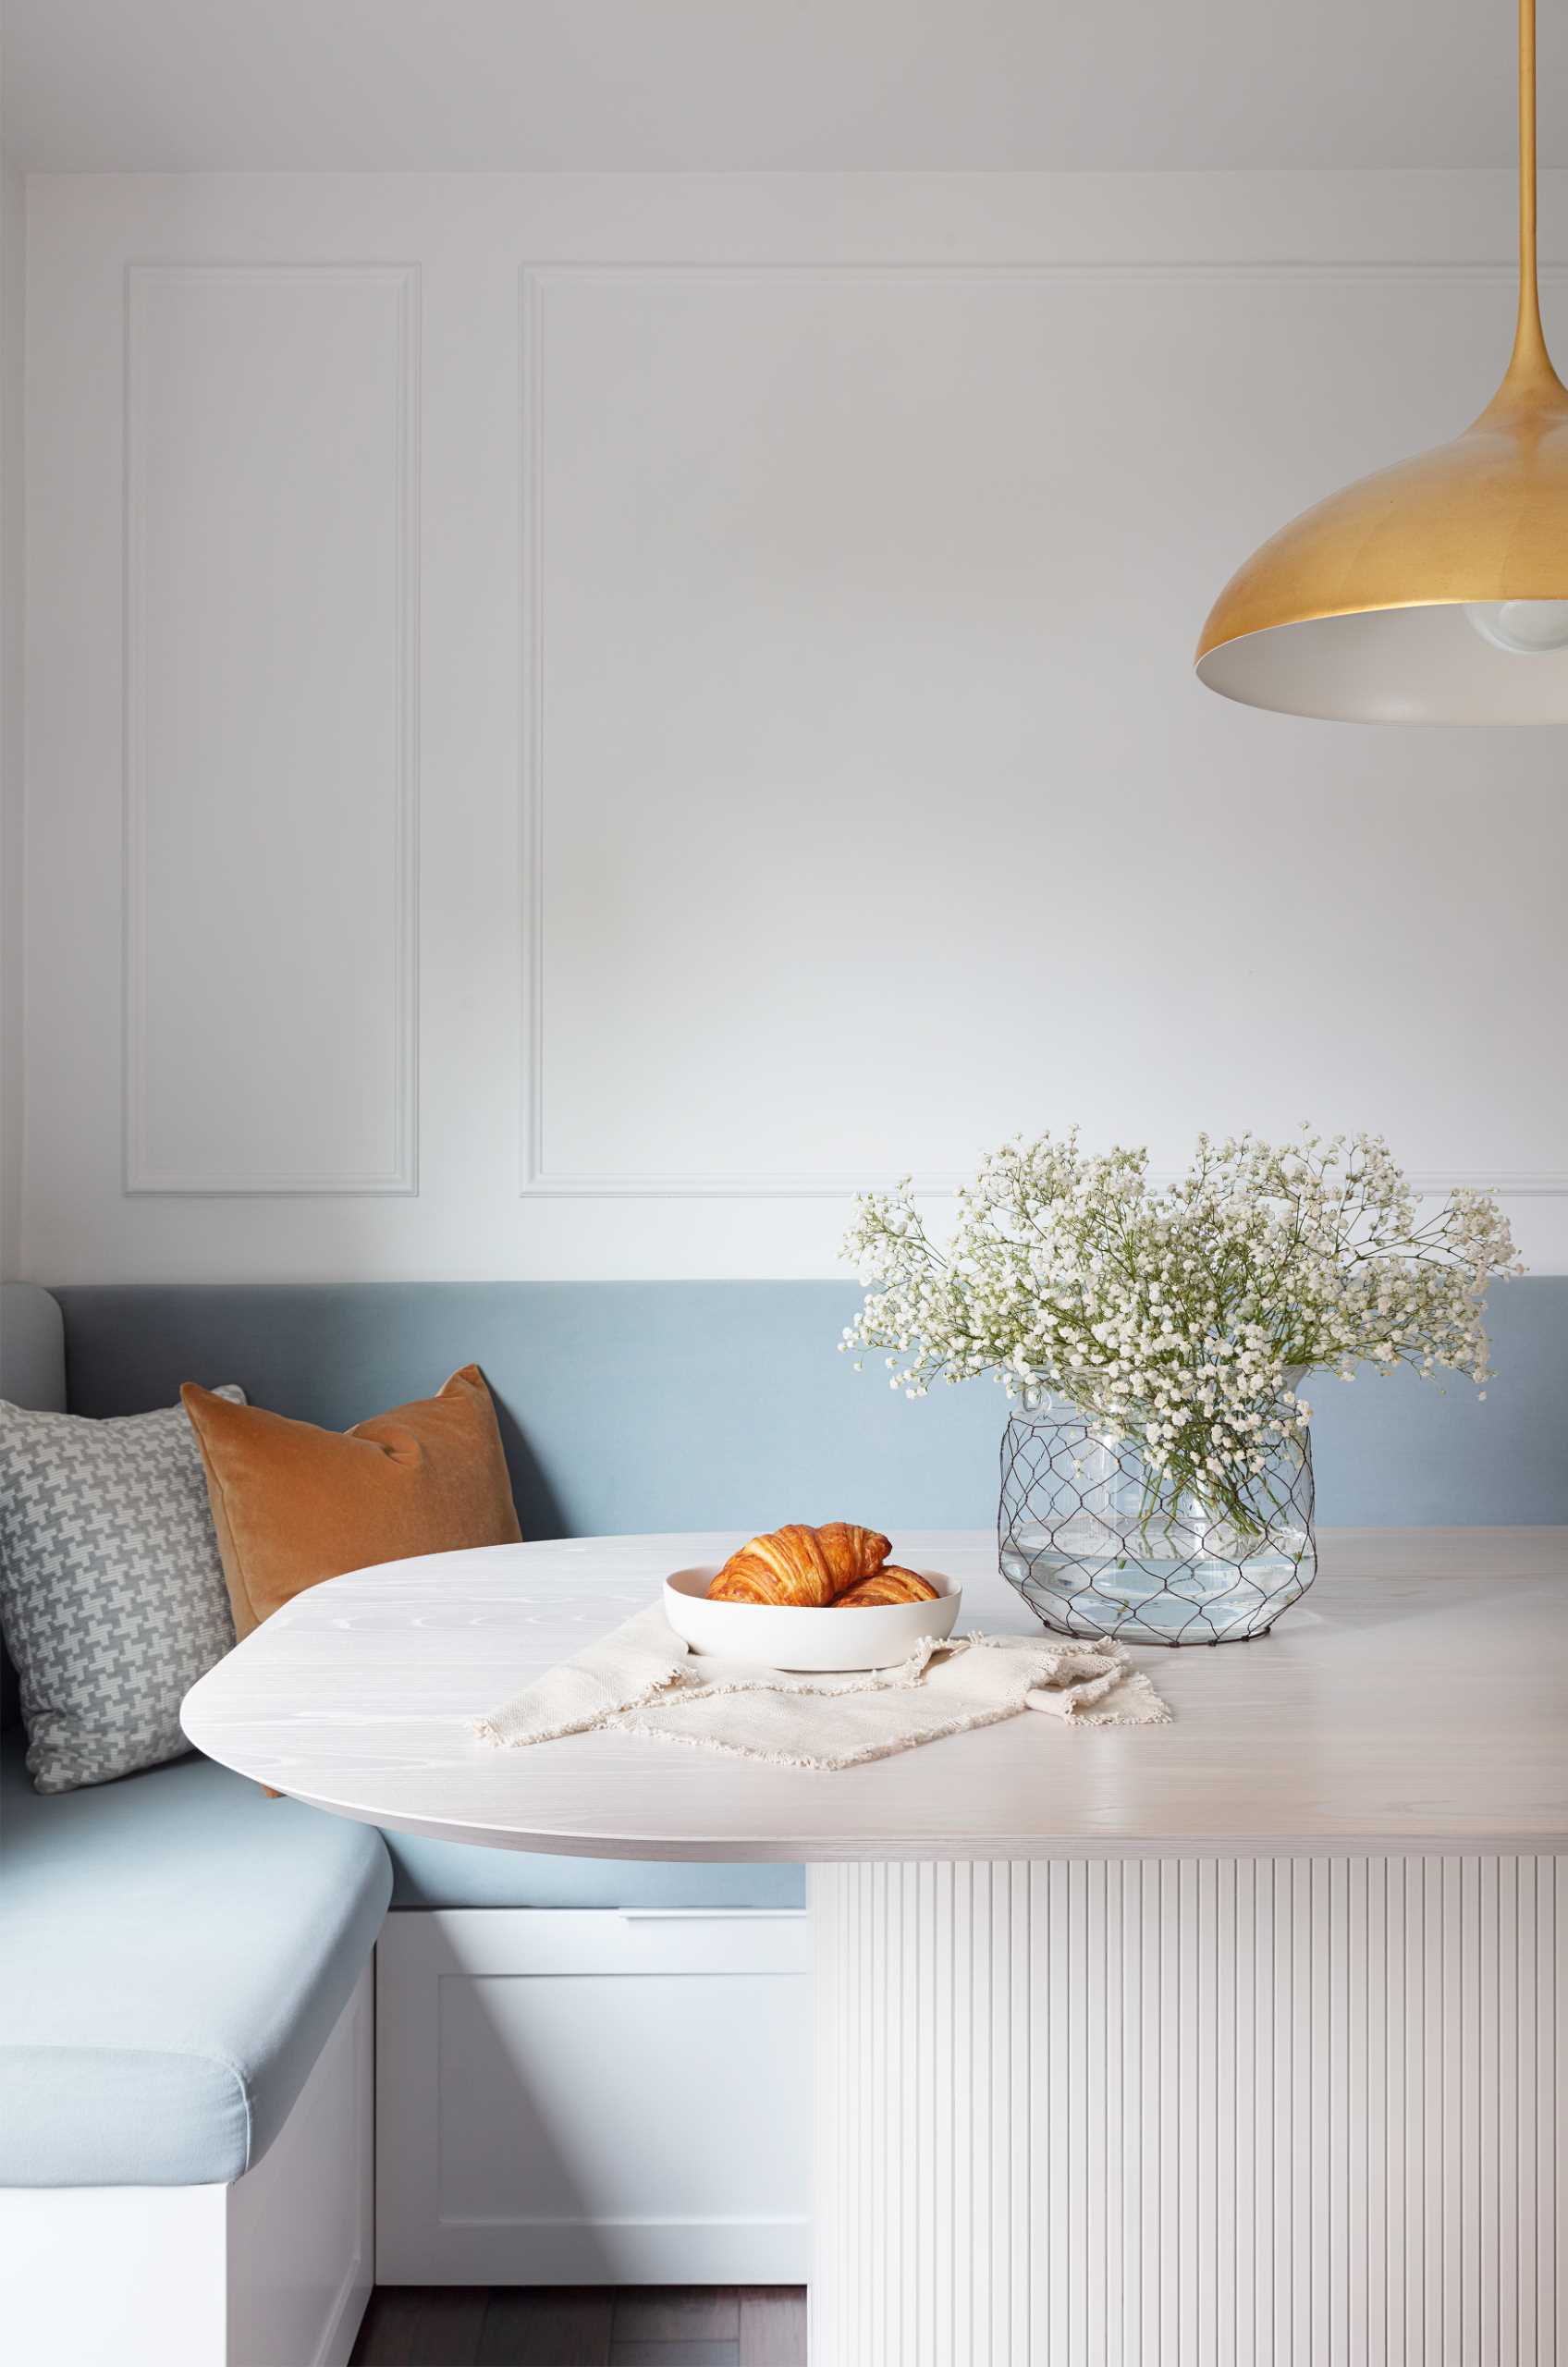 A contemporary dining area with banquette seating that lines the corner. The pale blue cushions add a soft pop of color to the mostly white space.